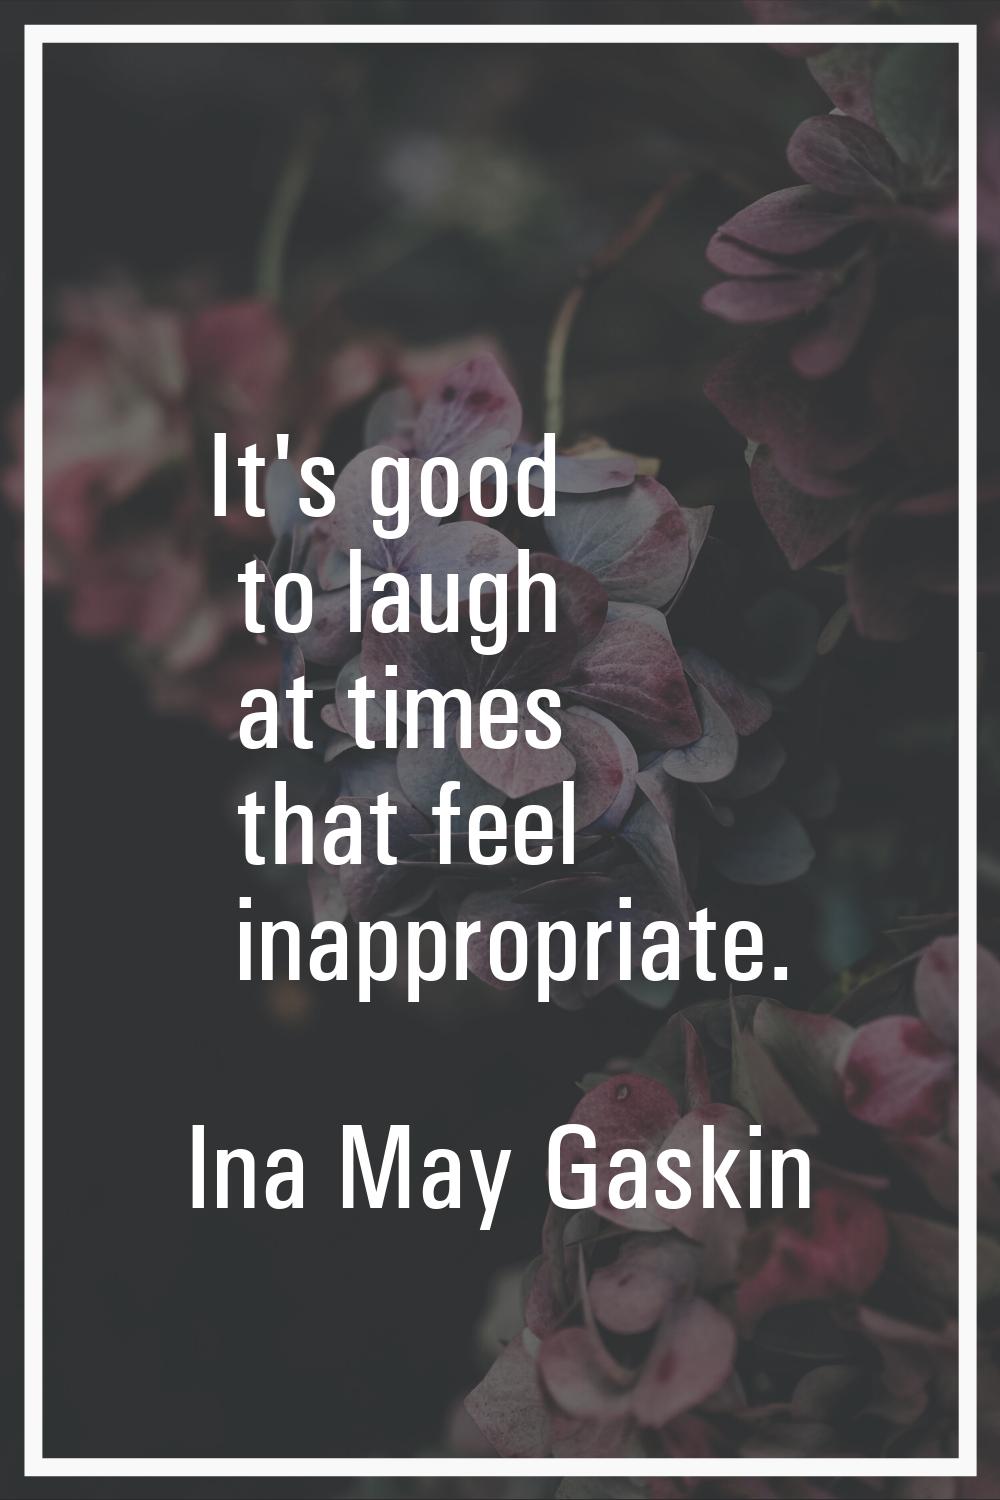 It's good to laugh at times that feel inappropriate.